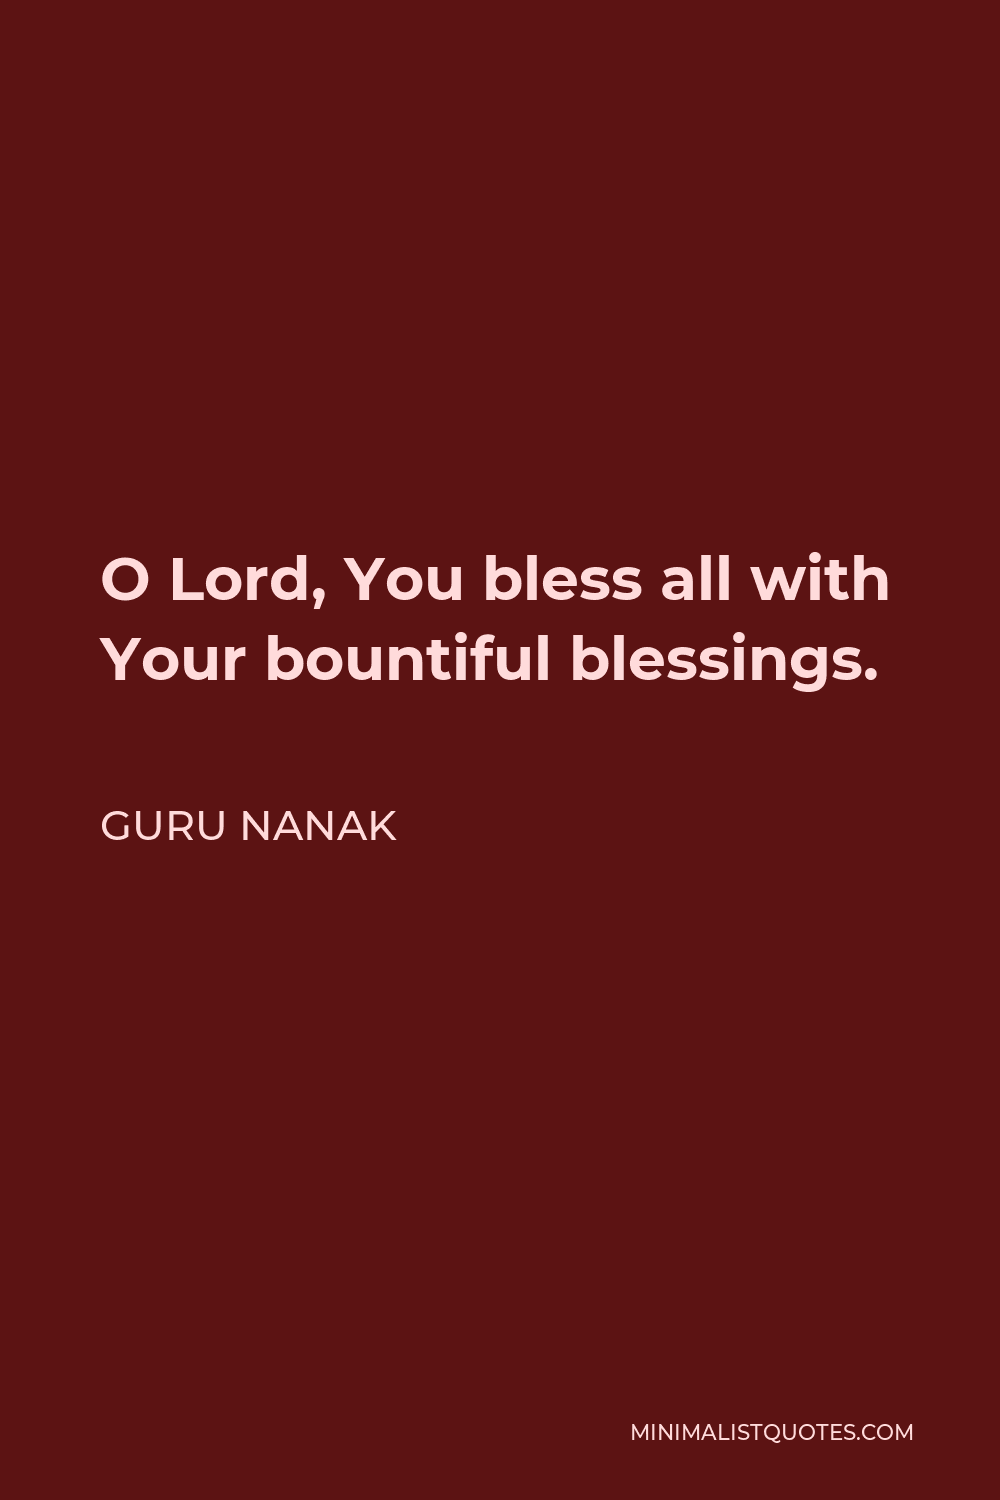 Guru Nanak Quote - O Lord, You bless all with Your bountiful blessings.